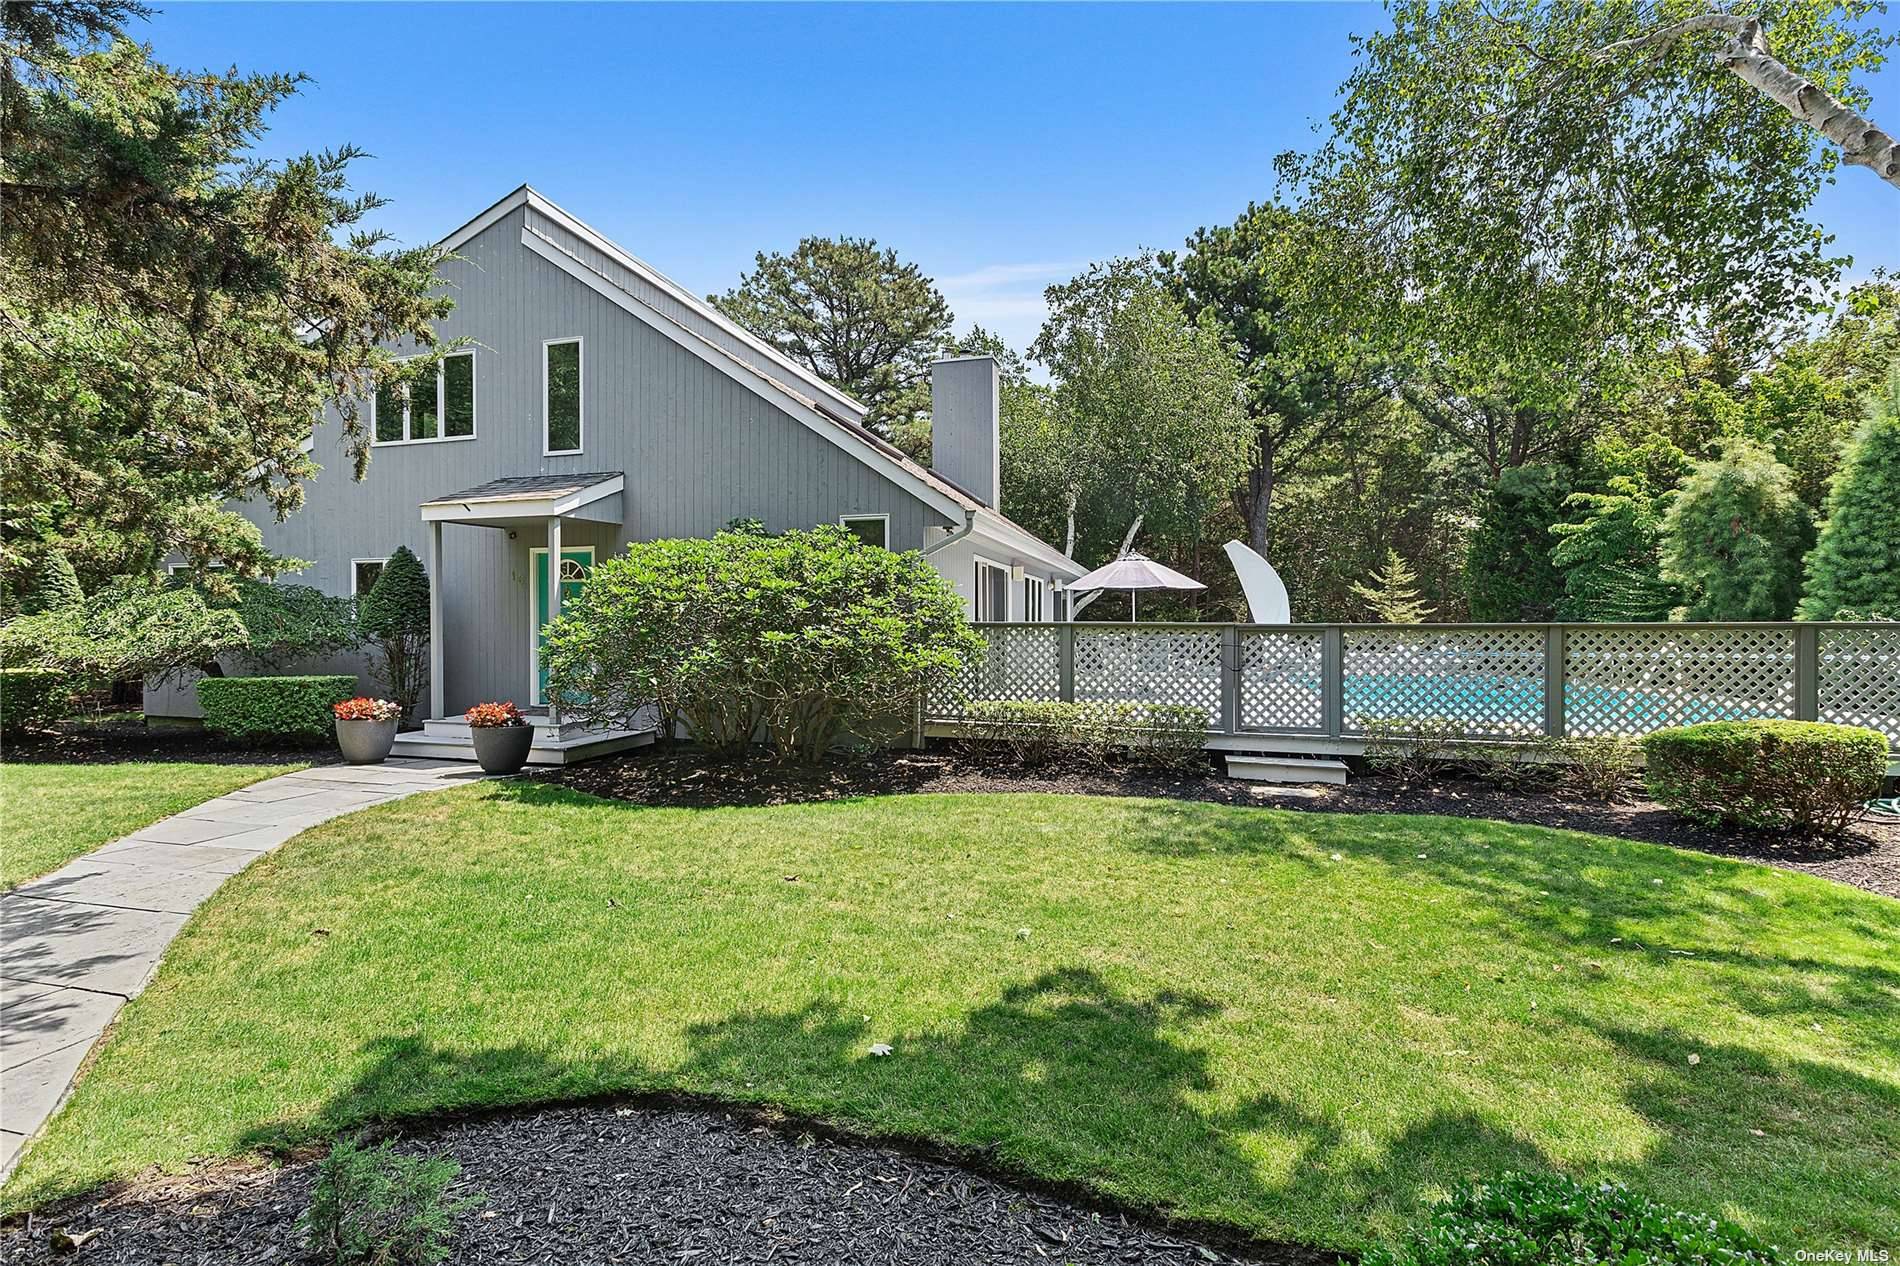 This beautiful turn key home situated on a private one acre lot, offers everything one needs in Westhampton.